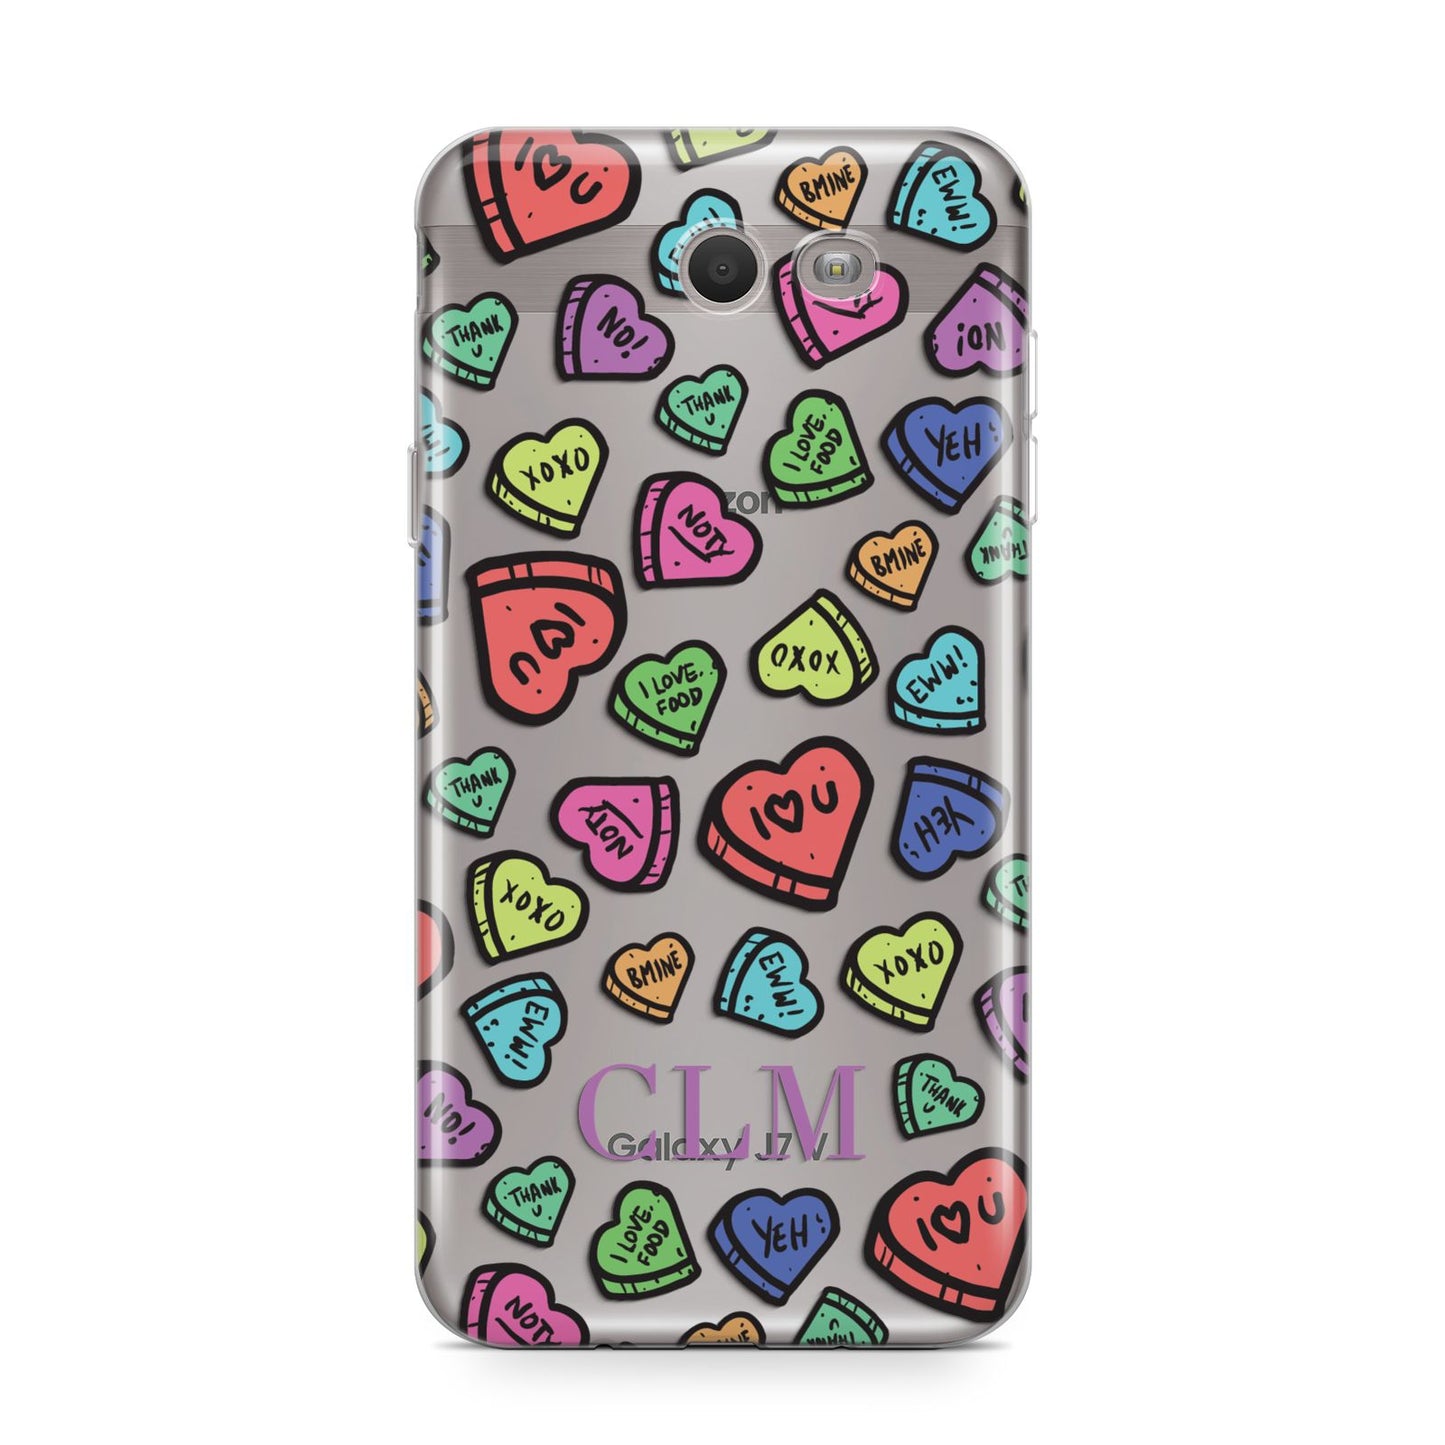 Personalised Love Hearts Initials Samsung Galaxy J7 2017 Case